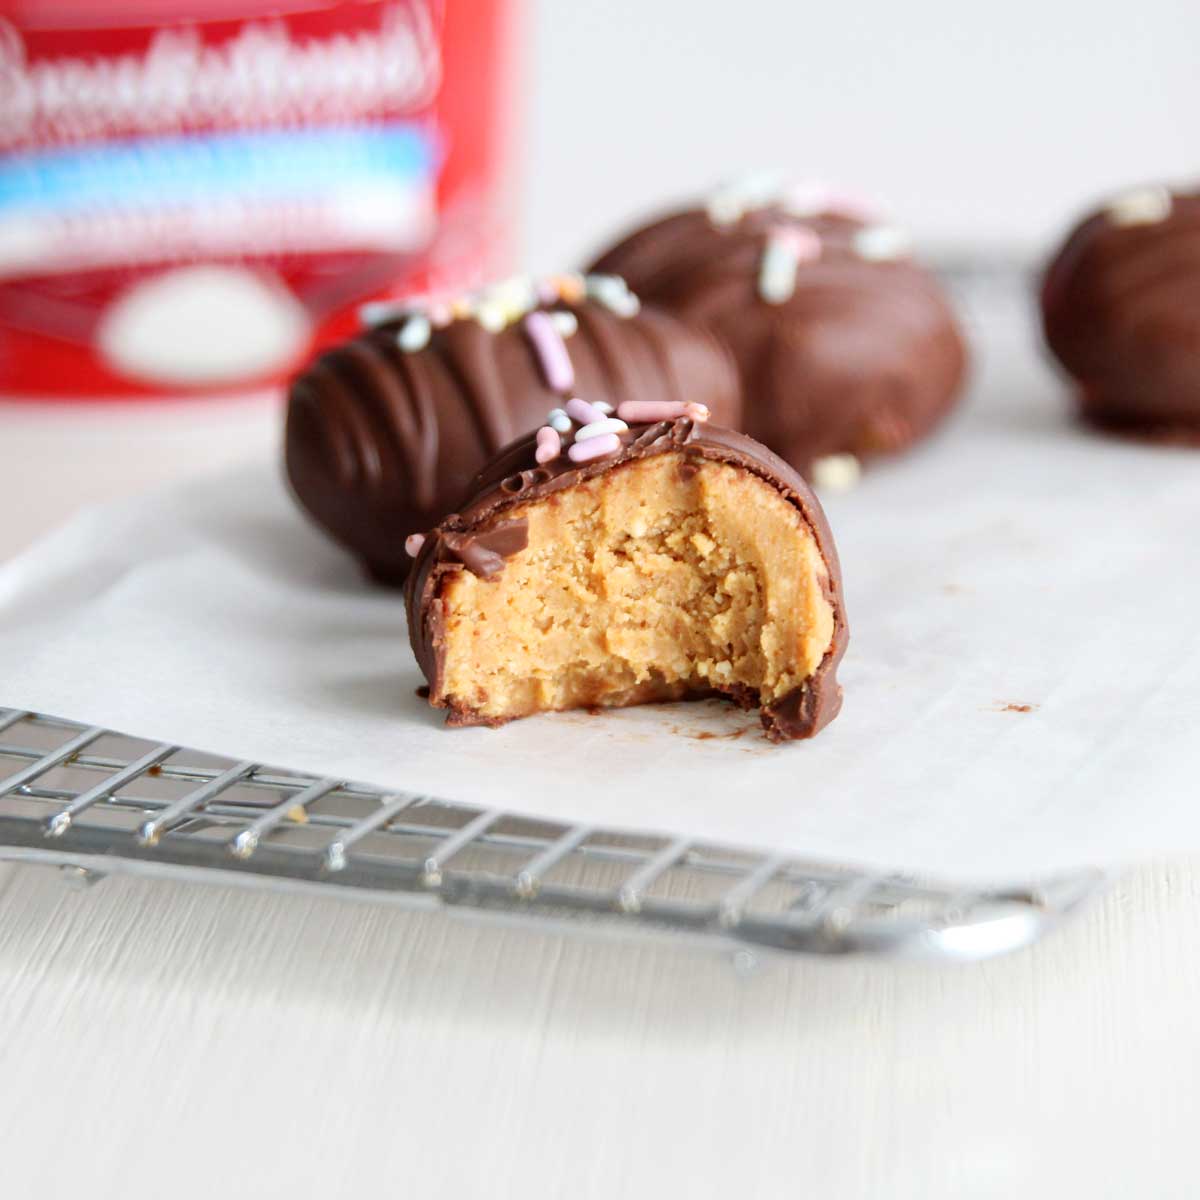 It Works! Cottage Cheese & Peanut Butter Easter Eggs (The Best High Protein Snack!)